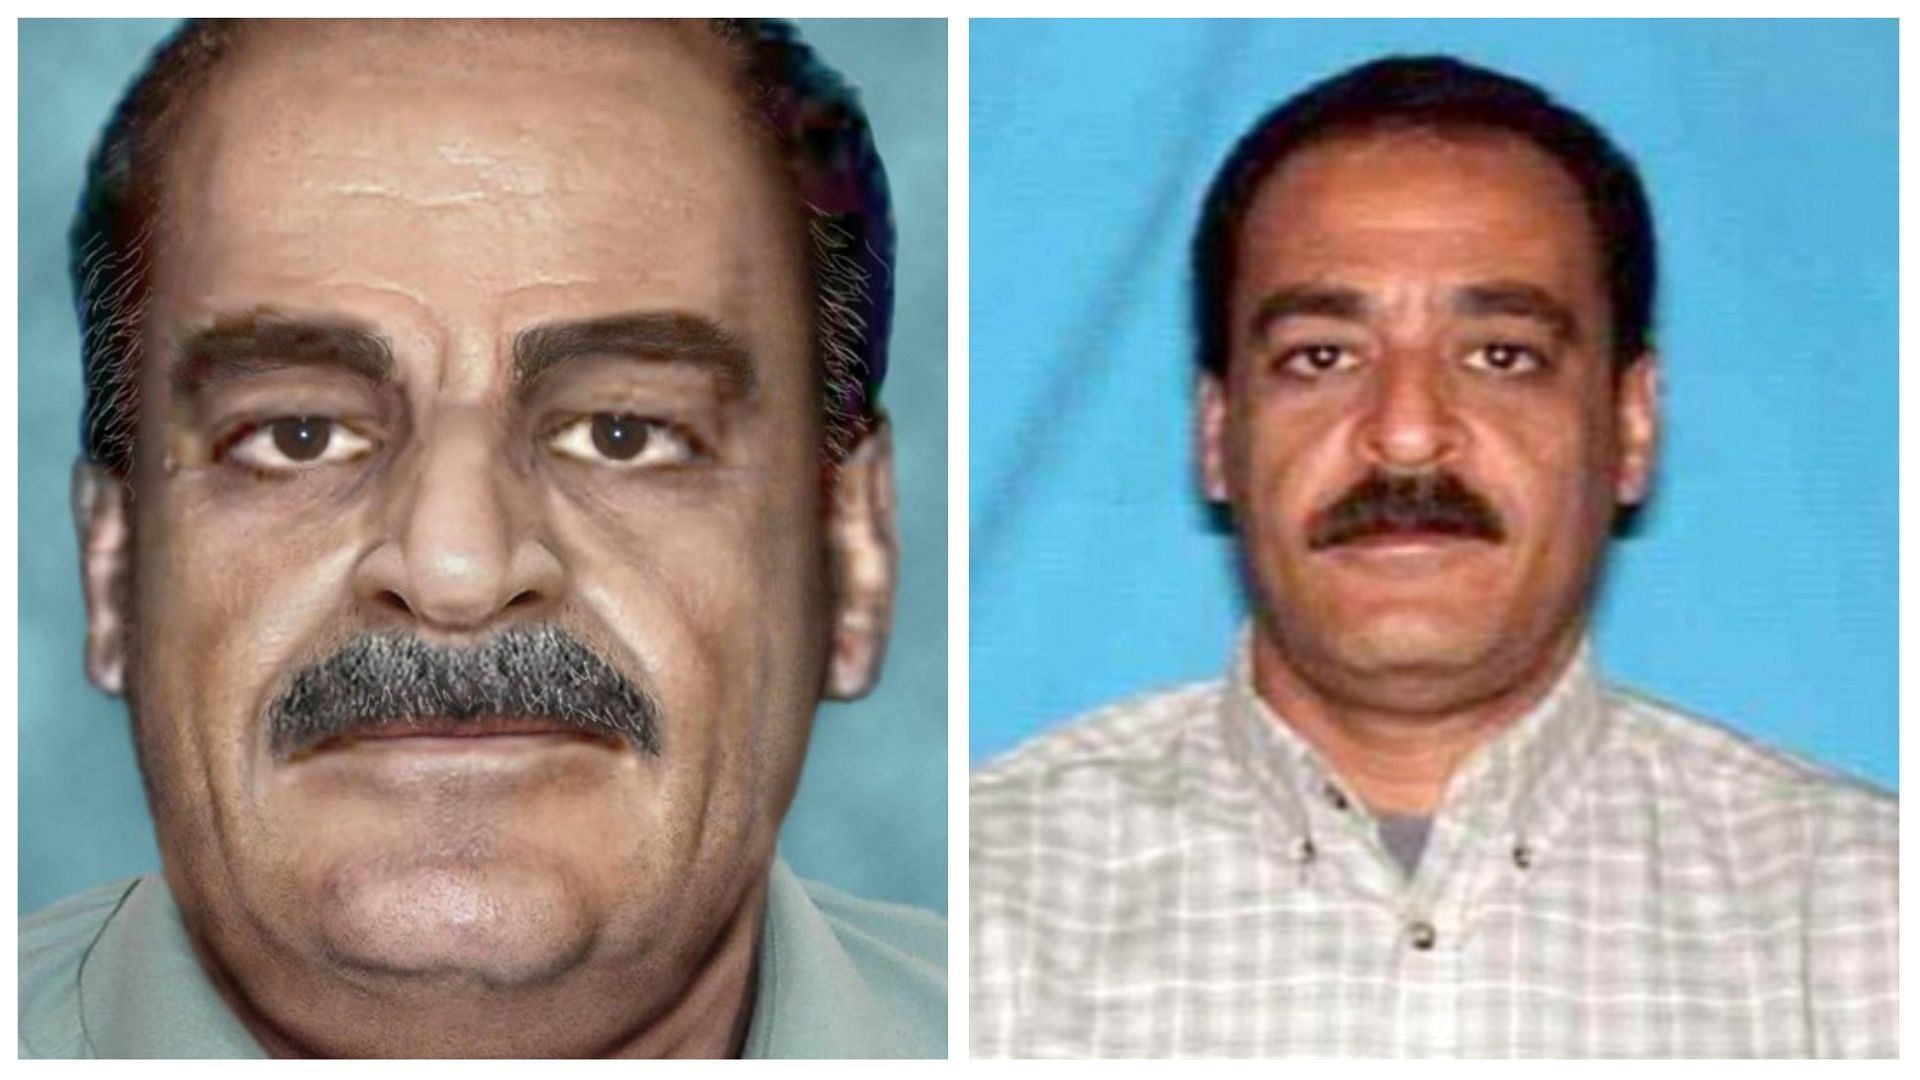 Said had fled authorities for more than 12 years(images via melauspartners/FBI)